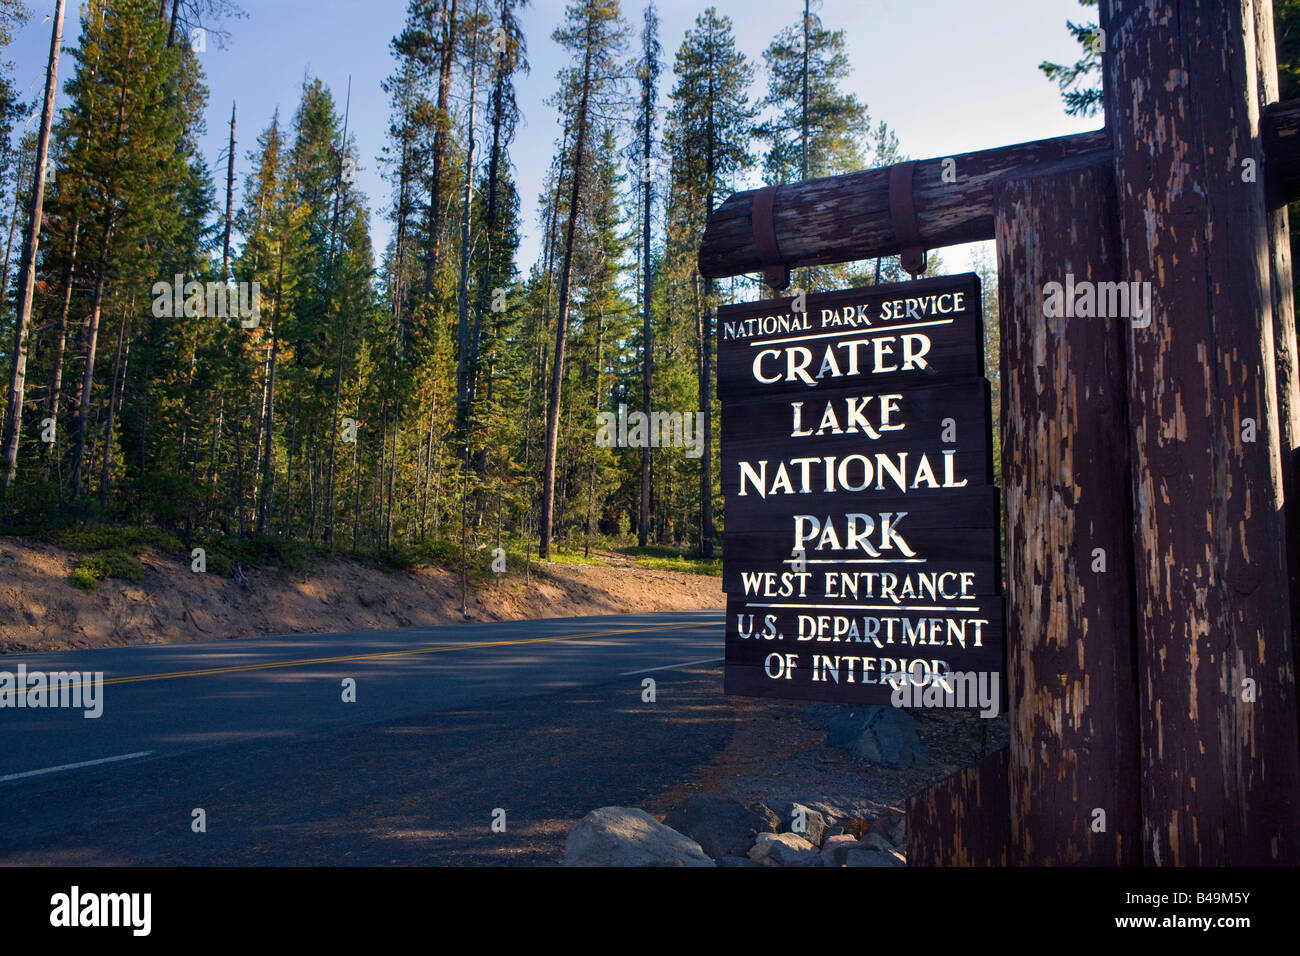 National Park Service entrance sign to the western entrance of Crater Lake National Park, Oregon Stock Photo